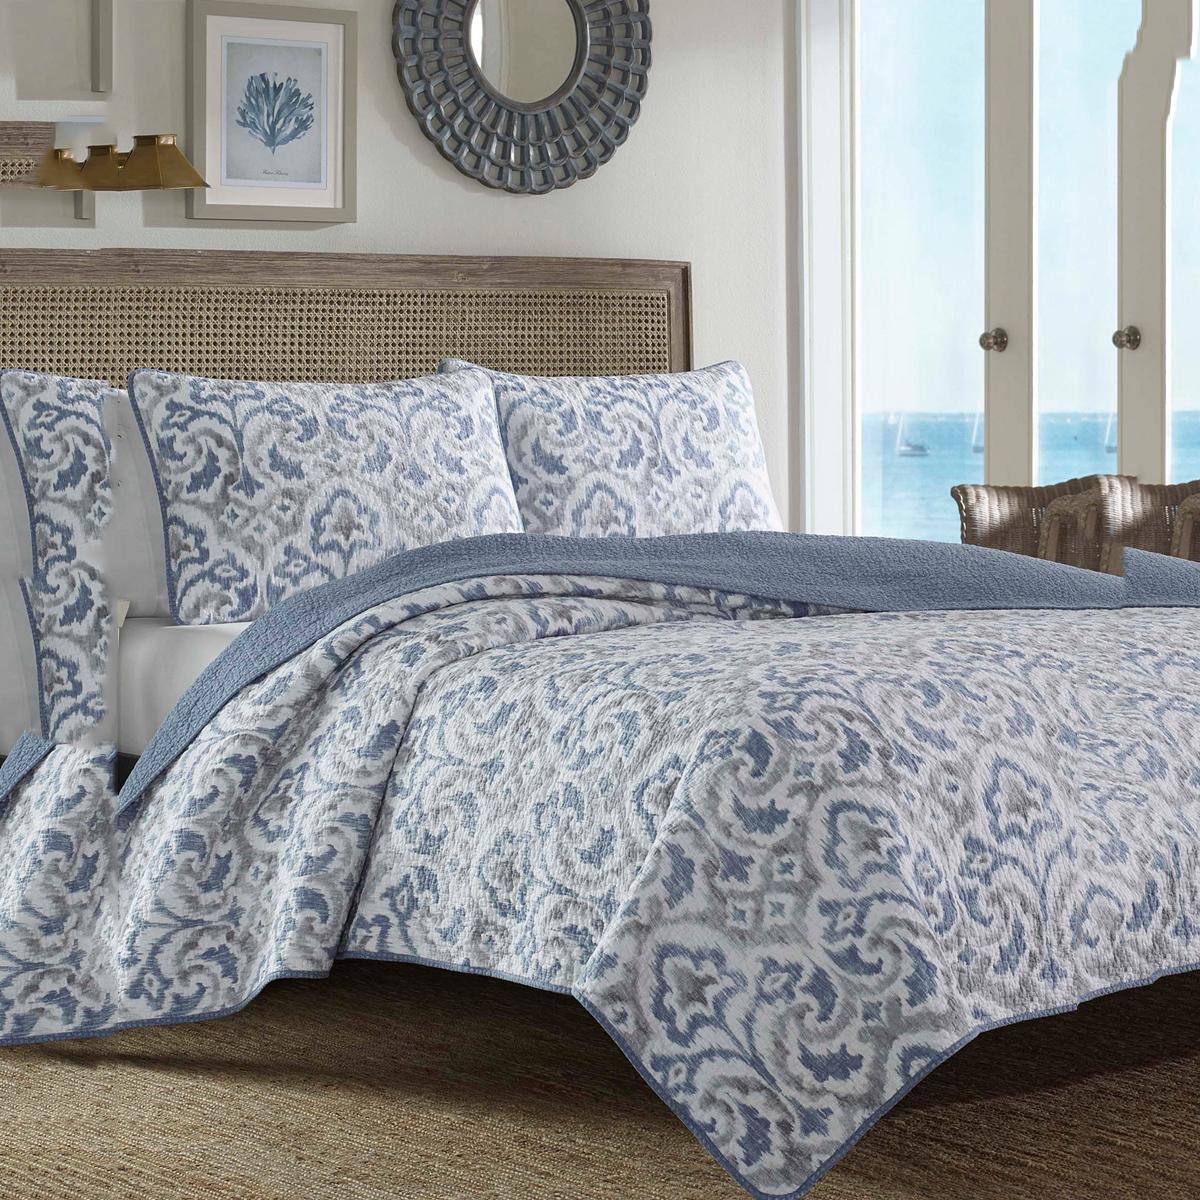 Tommy Bahama 100% Cotton Reversible Quilt Sets for $49.99 Shipped